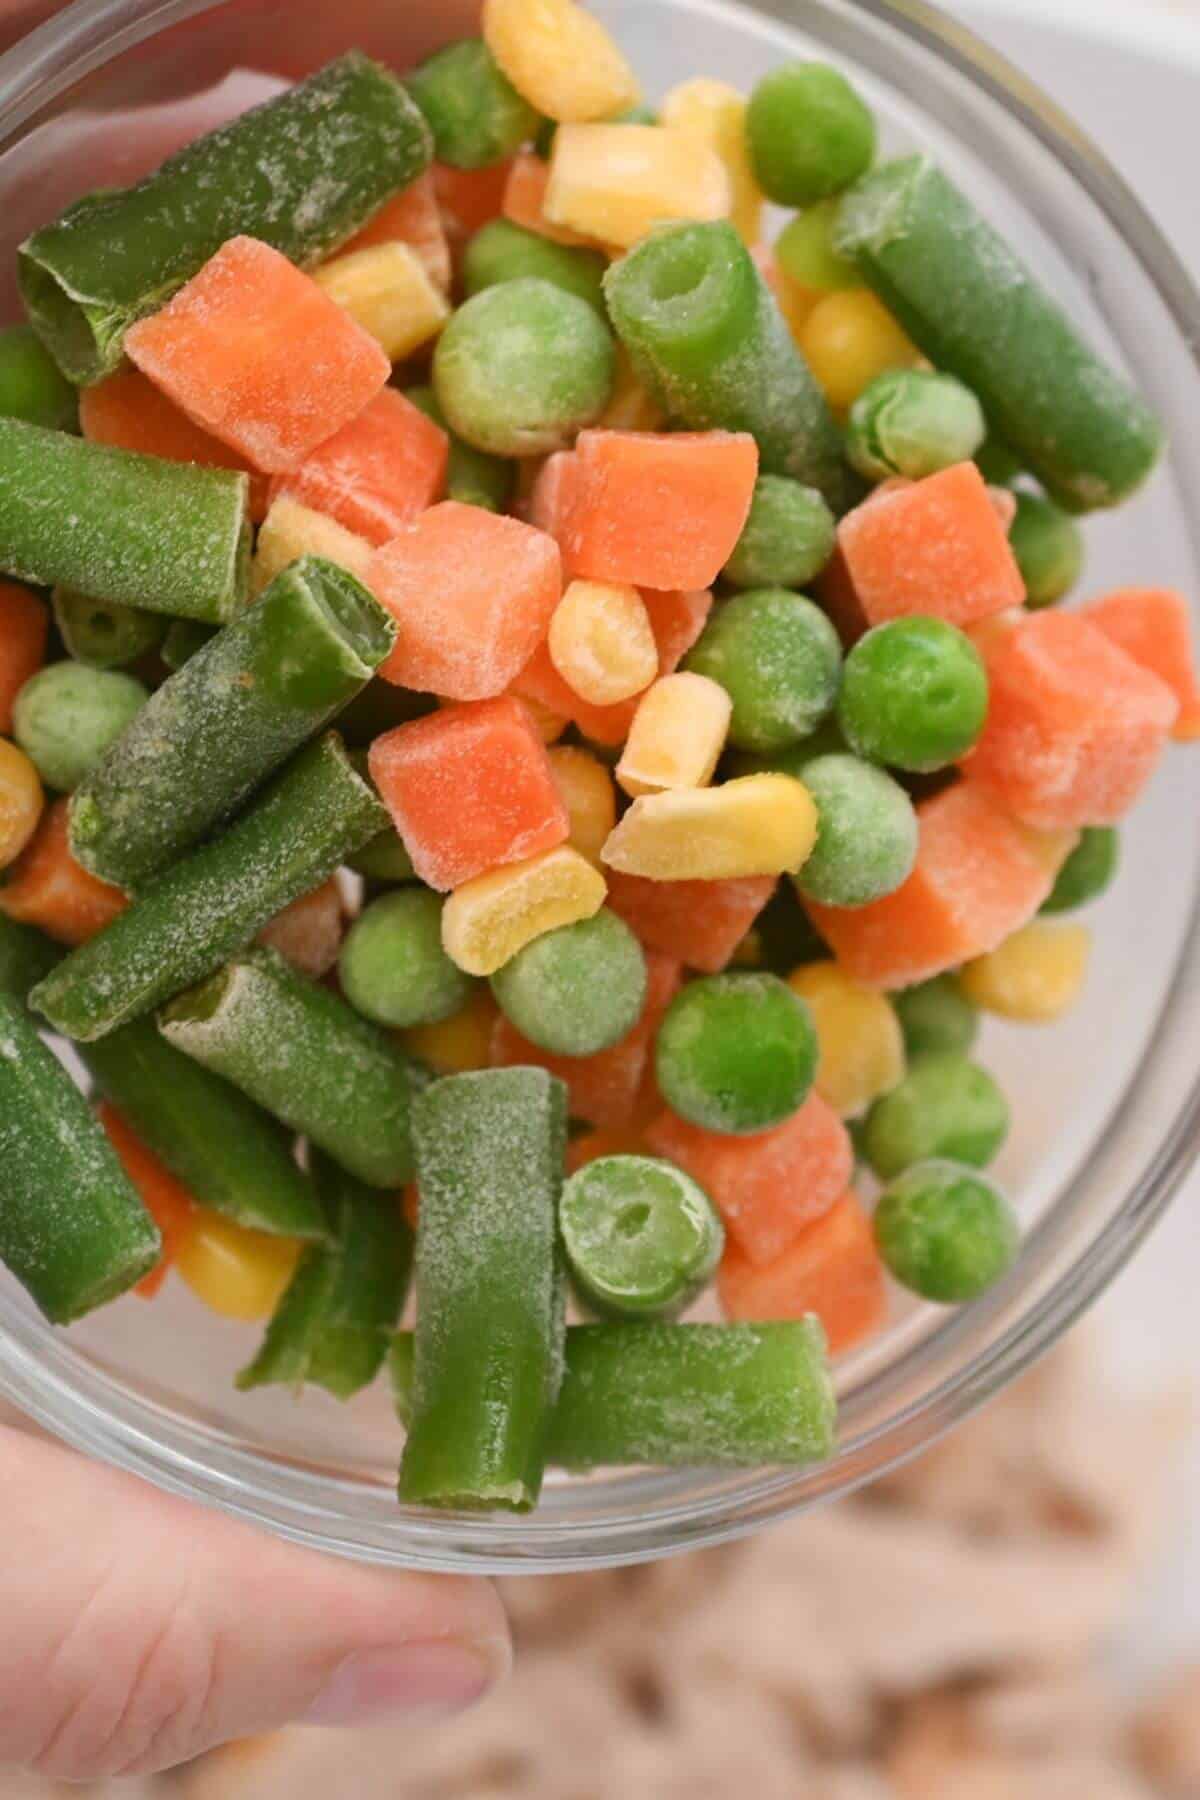 Frozen vegetable mix in a bowl.